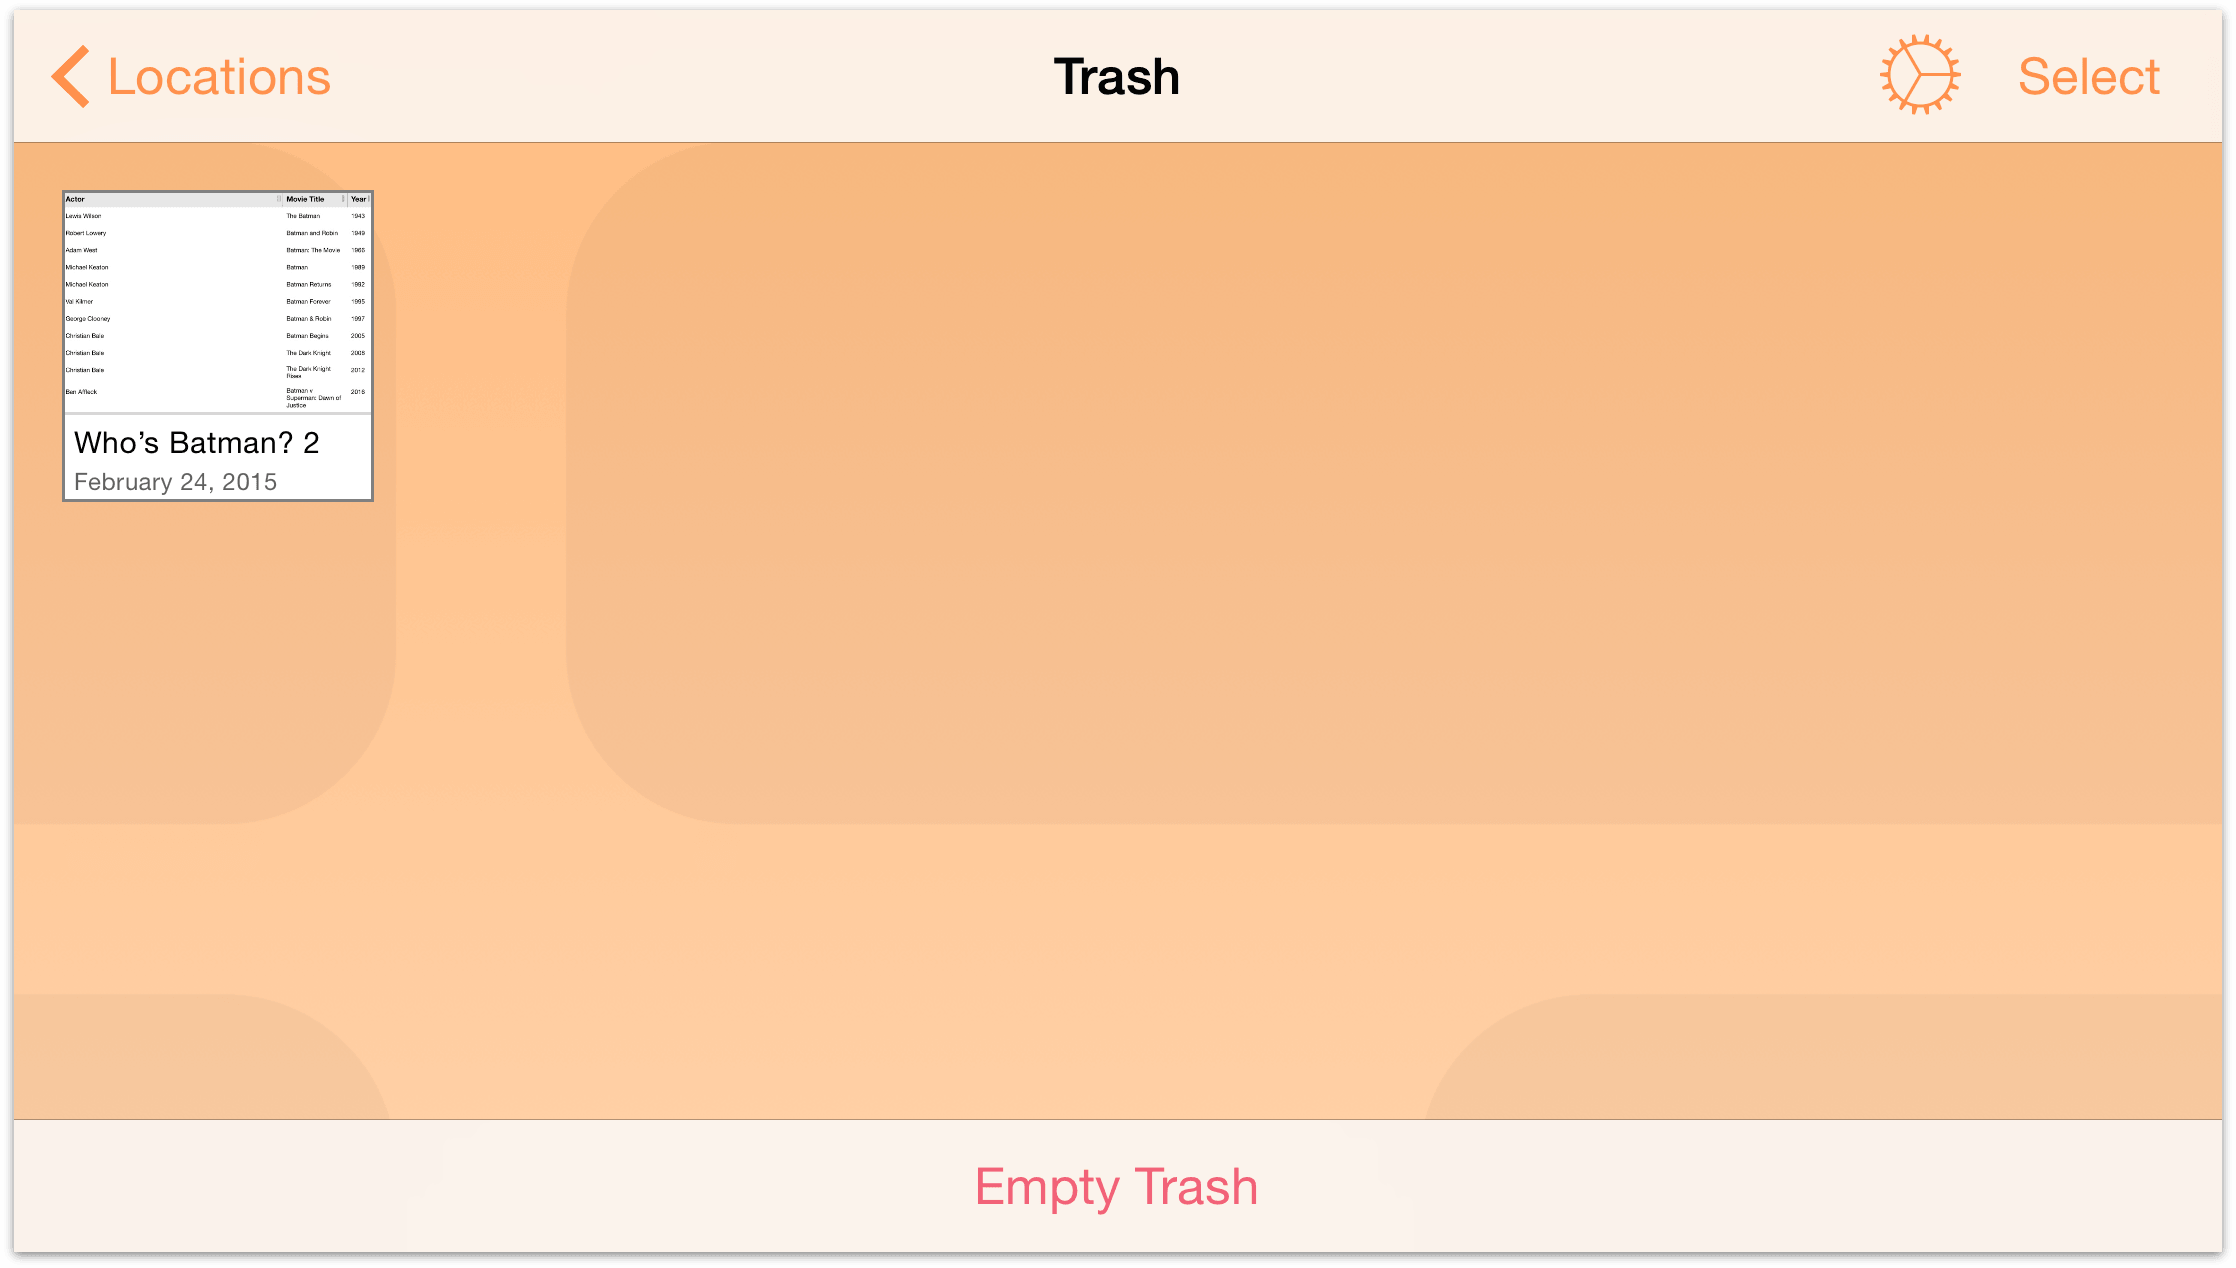 Select a file and tap the Shredder icon to delete the selected document, or tap Empty Trash to delete everything in the Trash